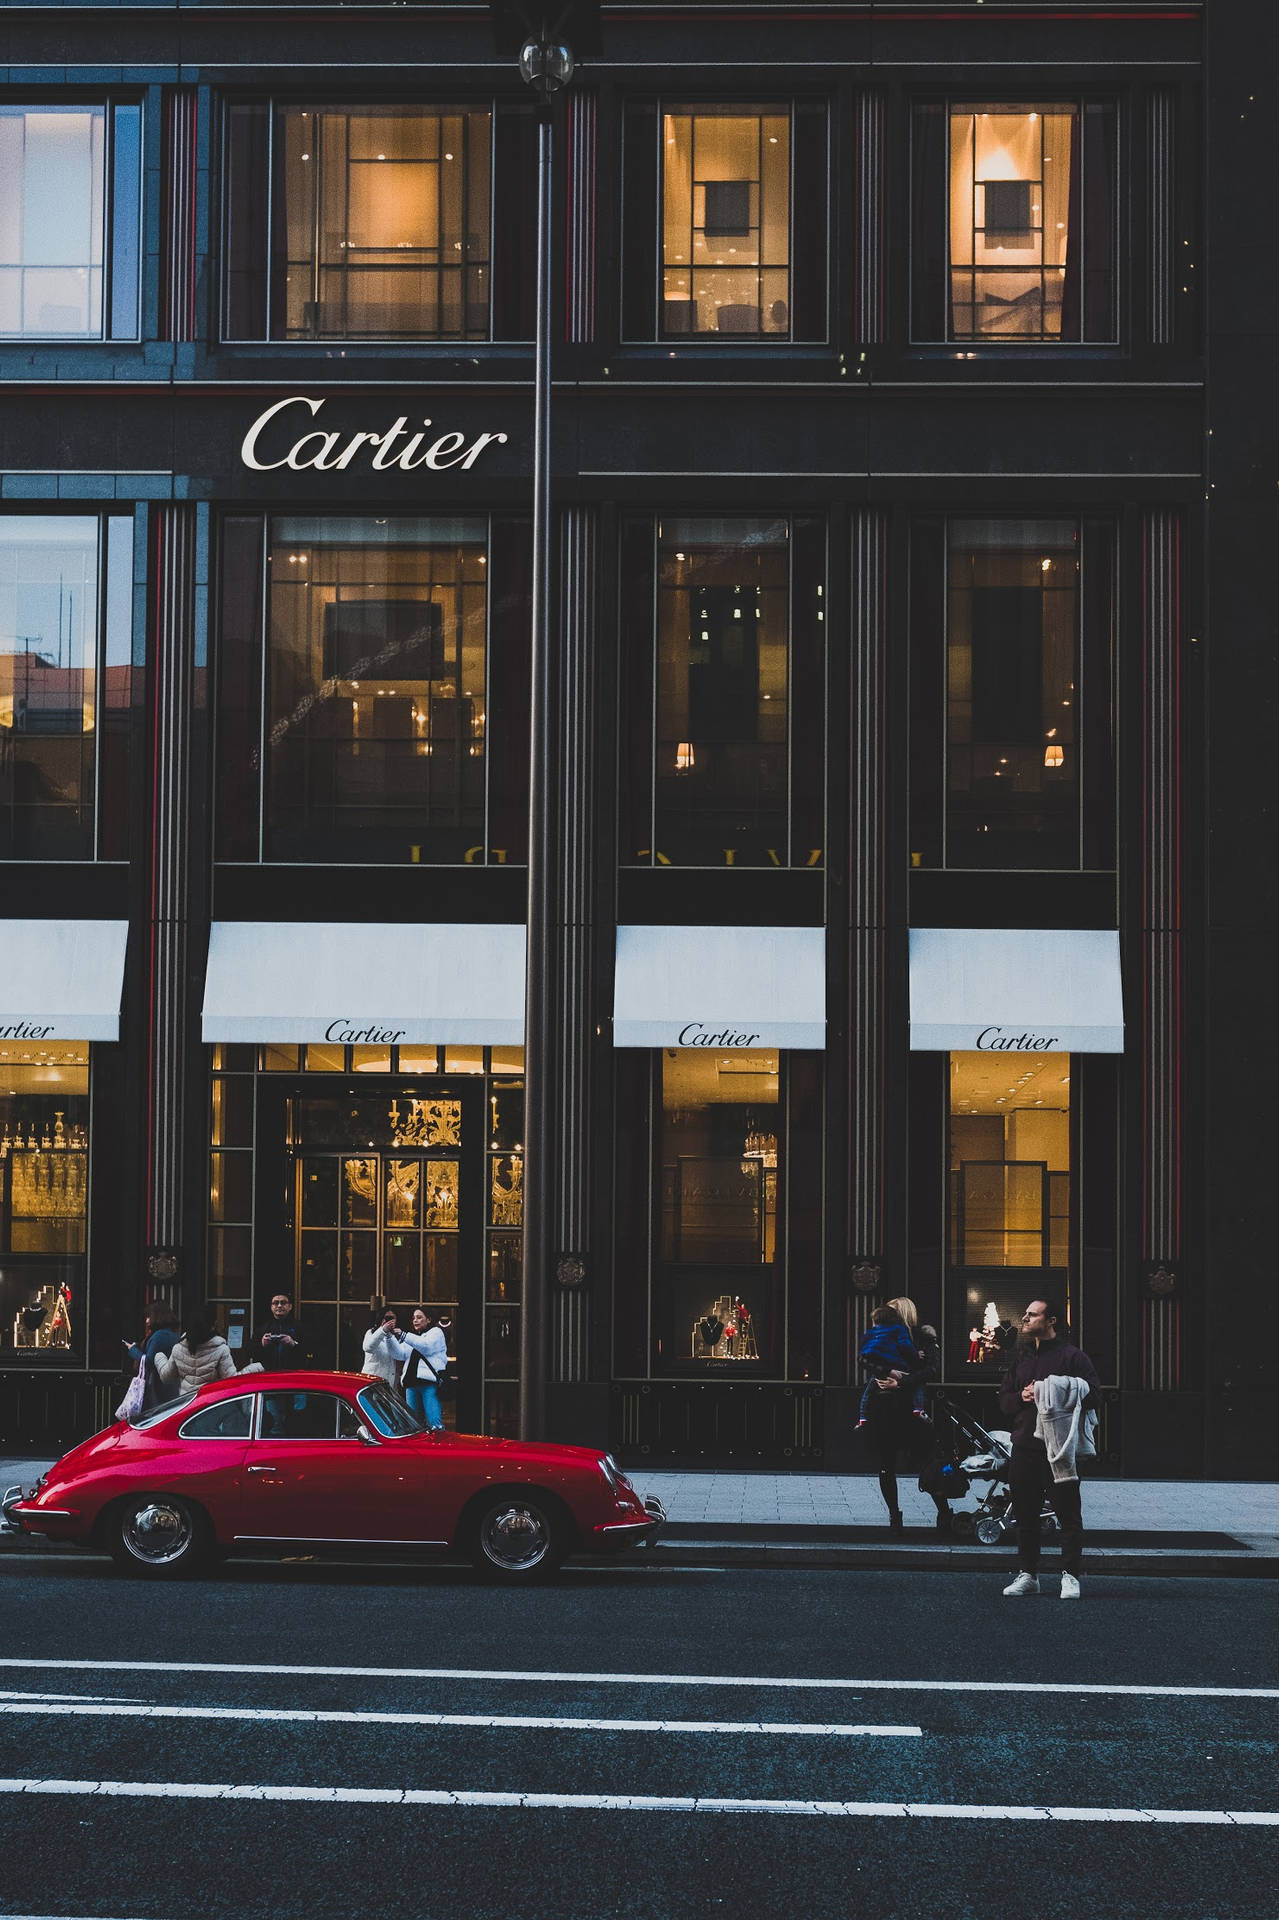 Red Luxury Car Outside Cartier Background